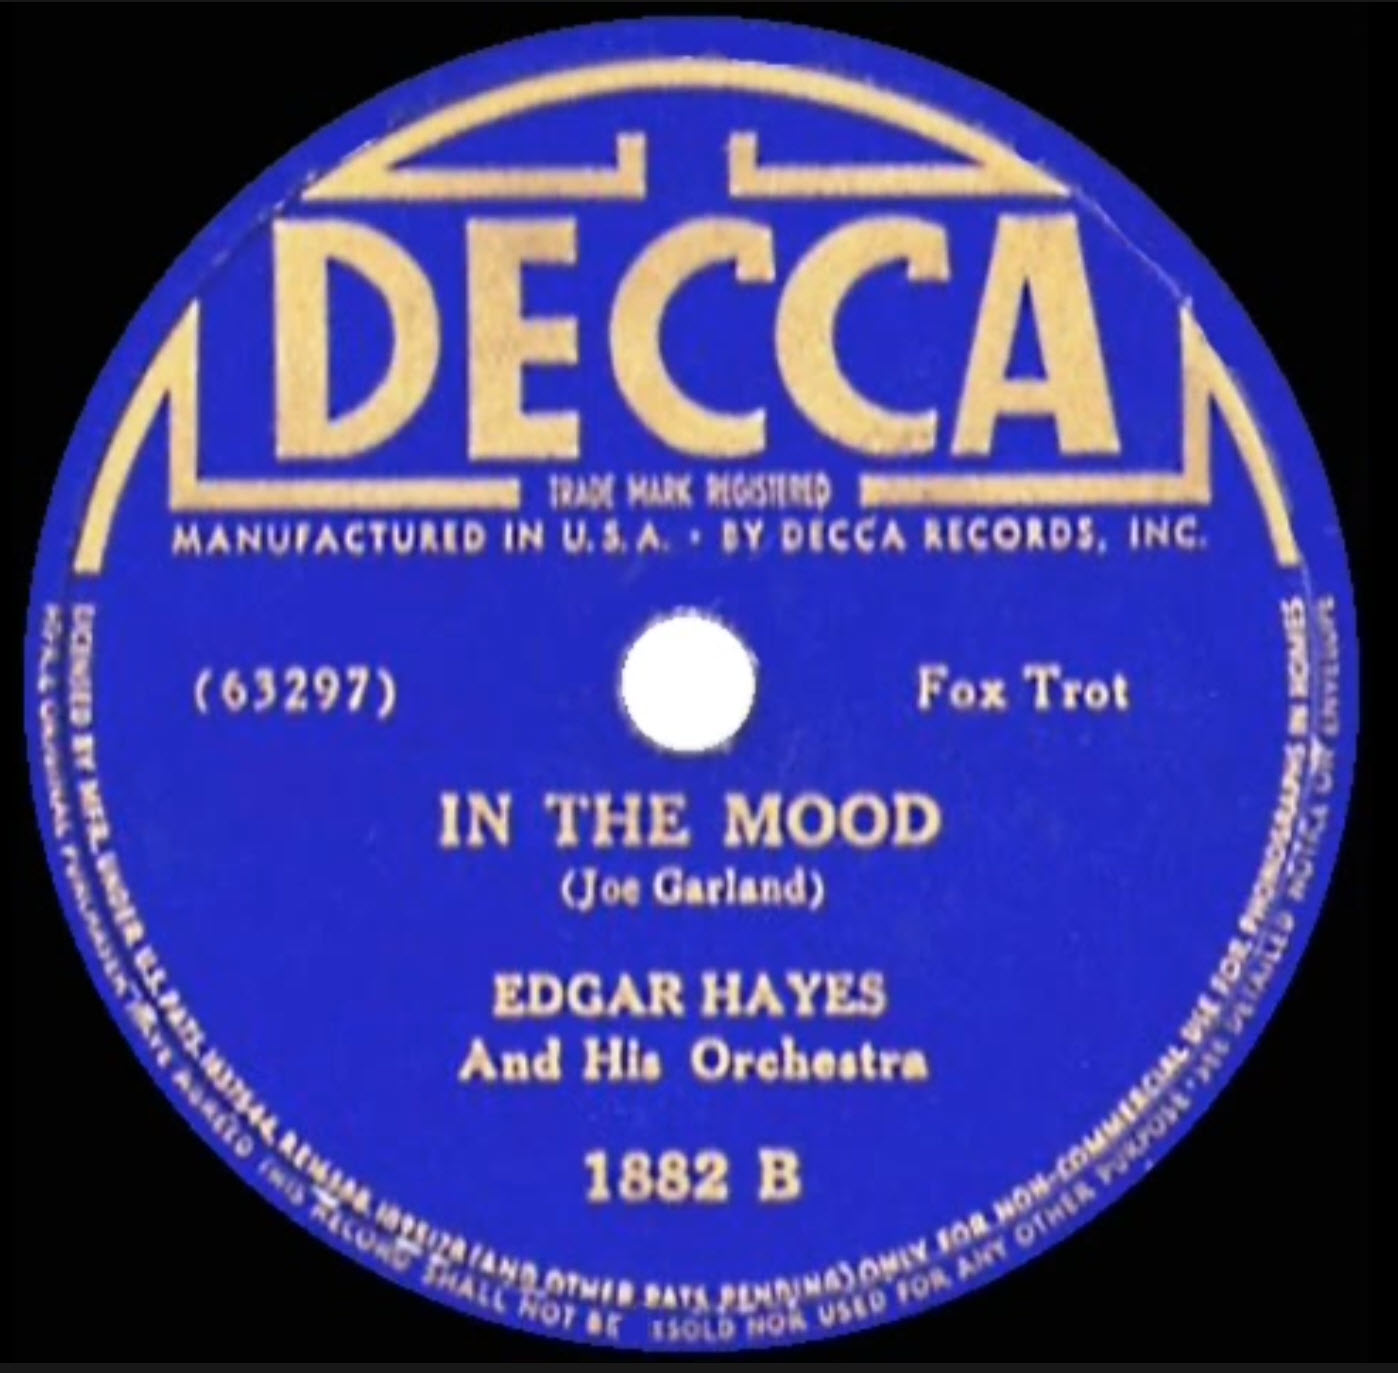 In The Mood - Edgar Hayes Orchestra